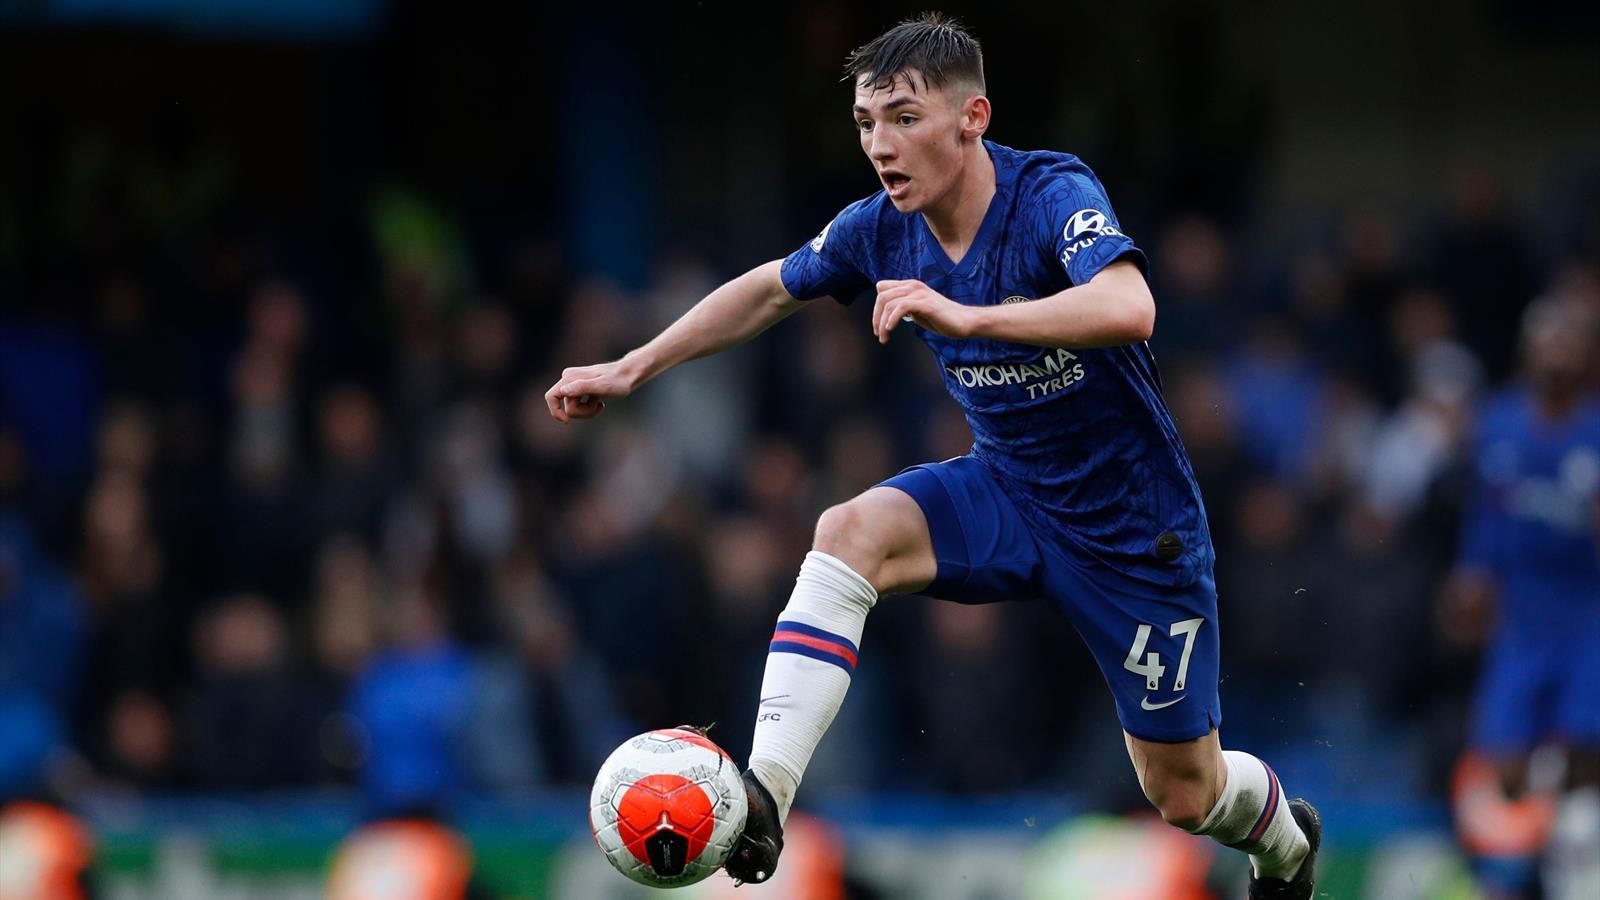 Football news - 'Billy Gilmour will be judged on a different level